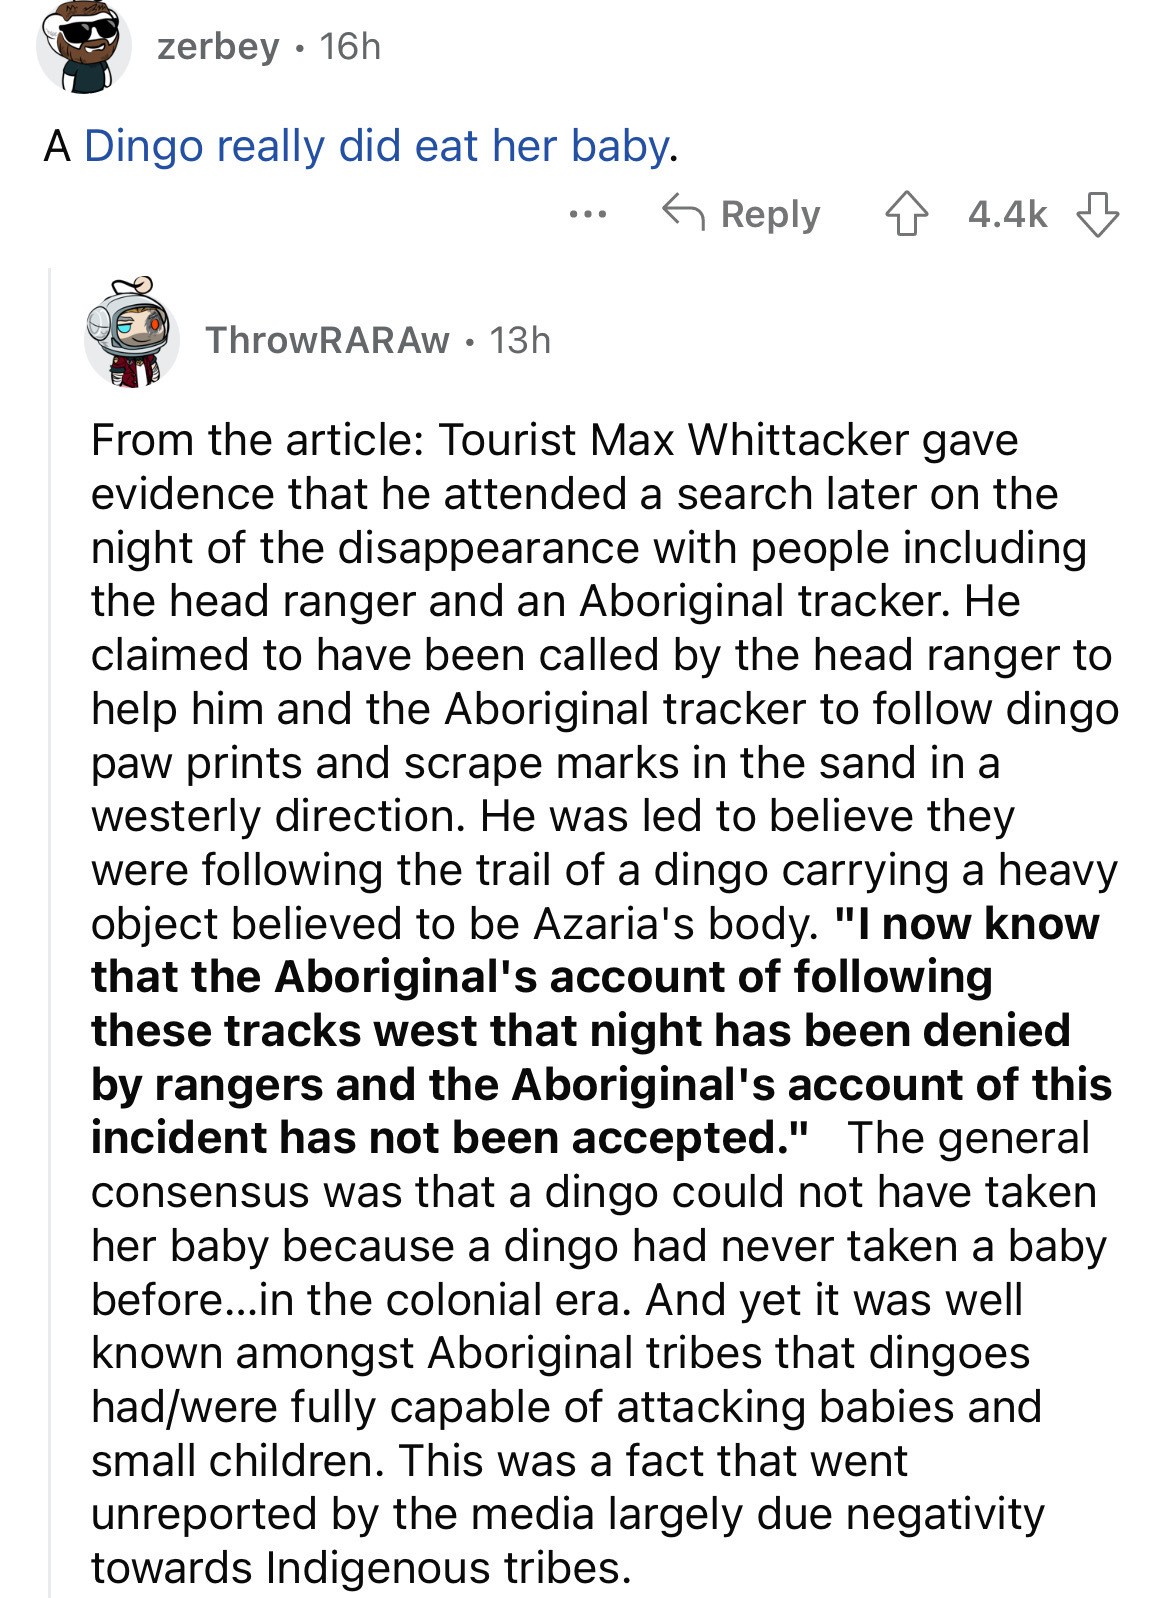 document - zerbey. 16h A Dingo really did eat her baby. ThrowRARAW. 13h From the article Tourist Max Whittacker gave evidence that he attended a search later on the night of the disappearance with people including the head ranger and an Aboriginal tracker